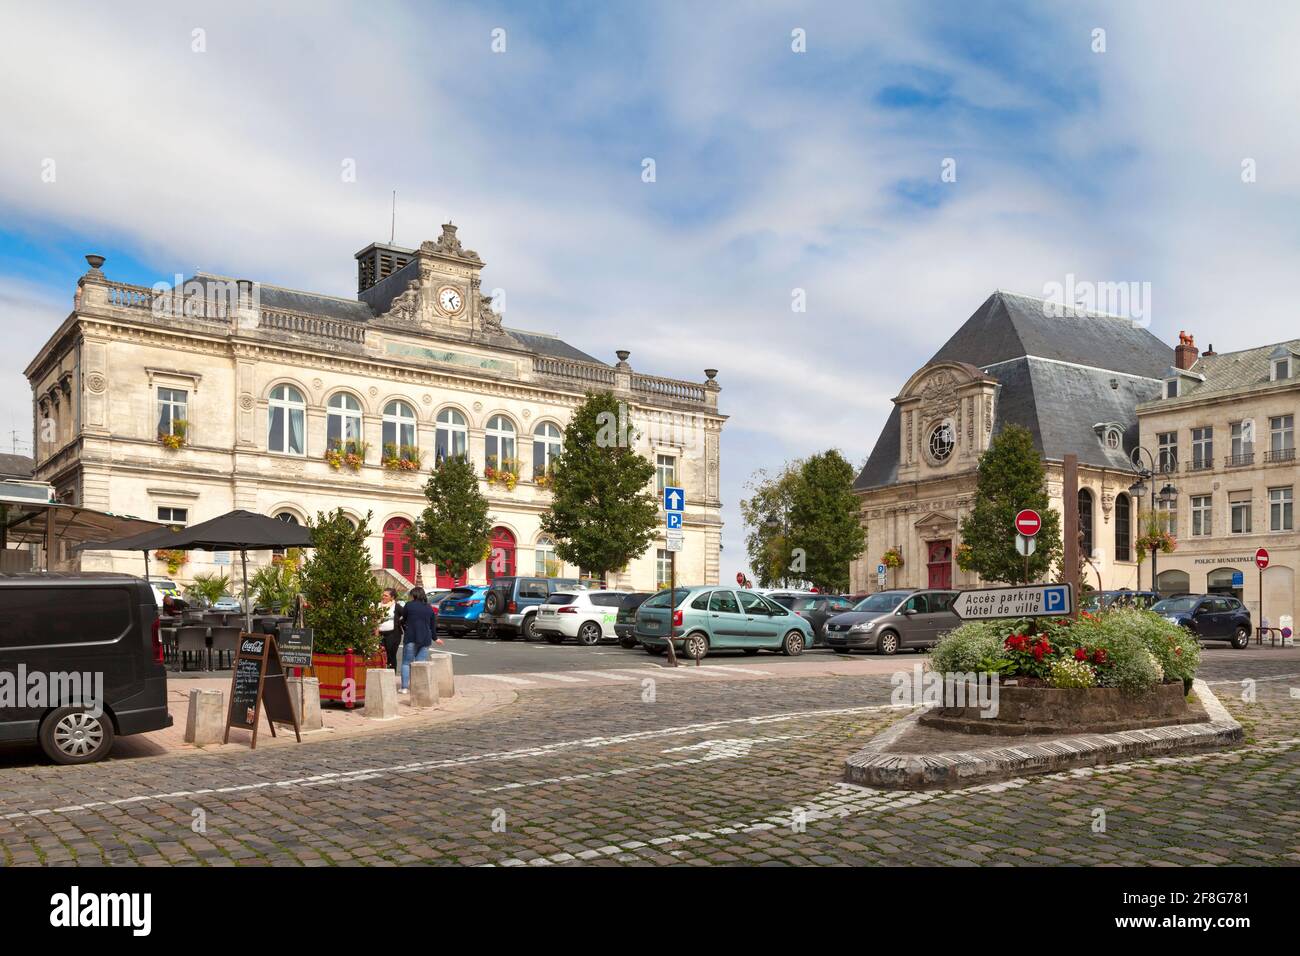 Laon, France - June 10 2020: The City hall is located in the upper town of Laon, in the department of Aisne. Stock Photo